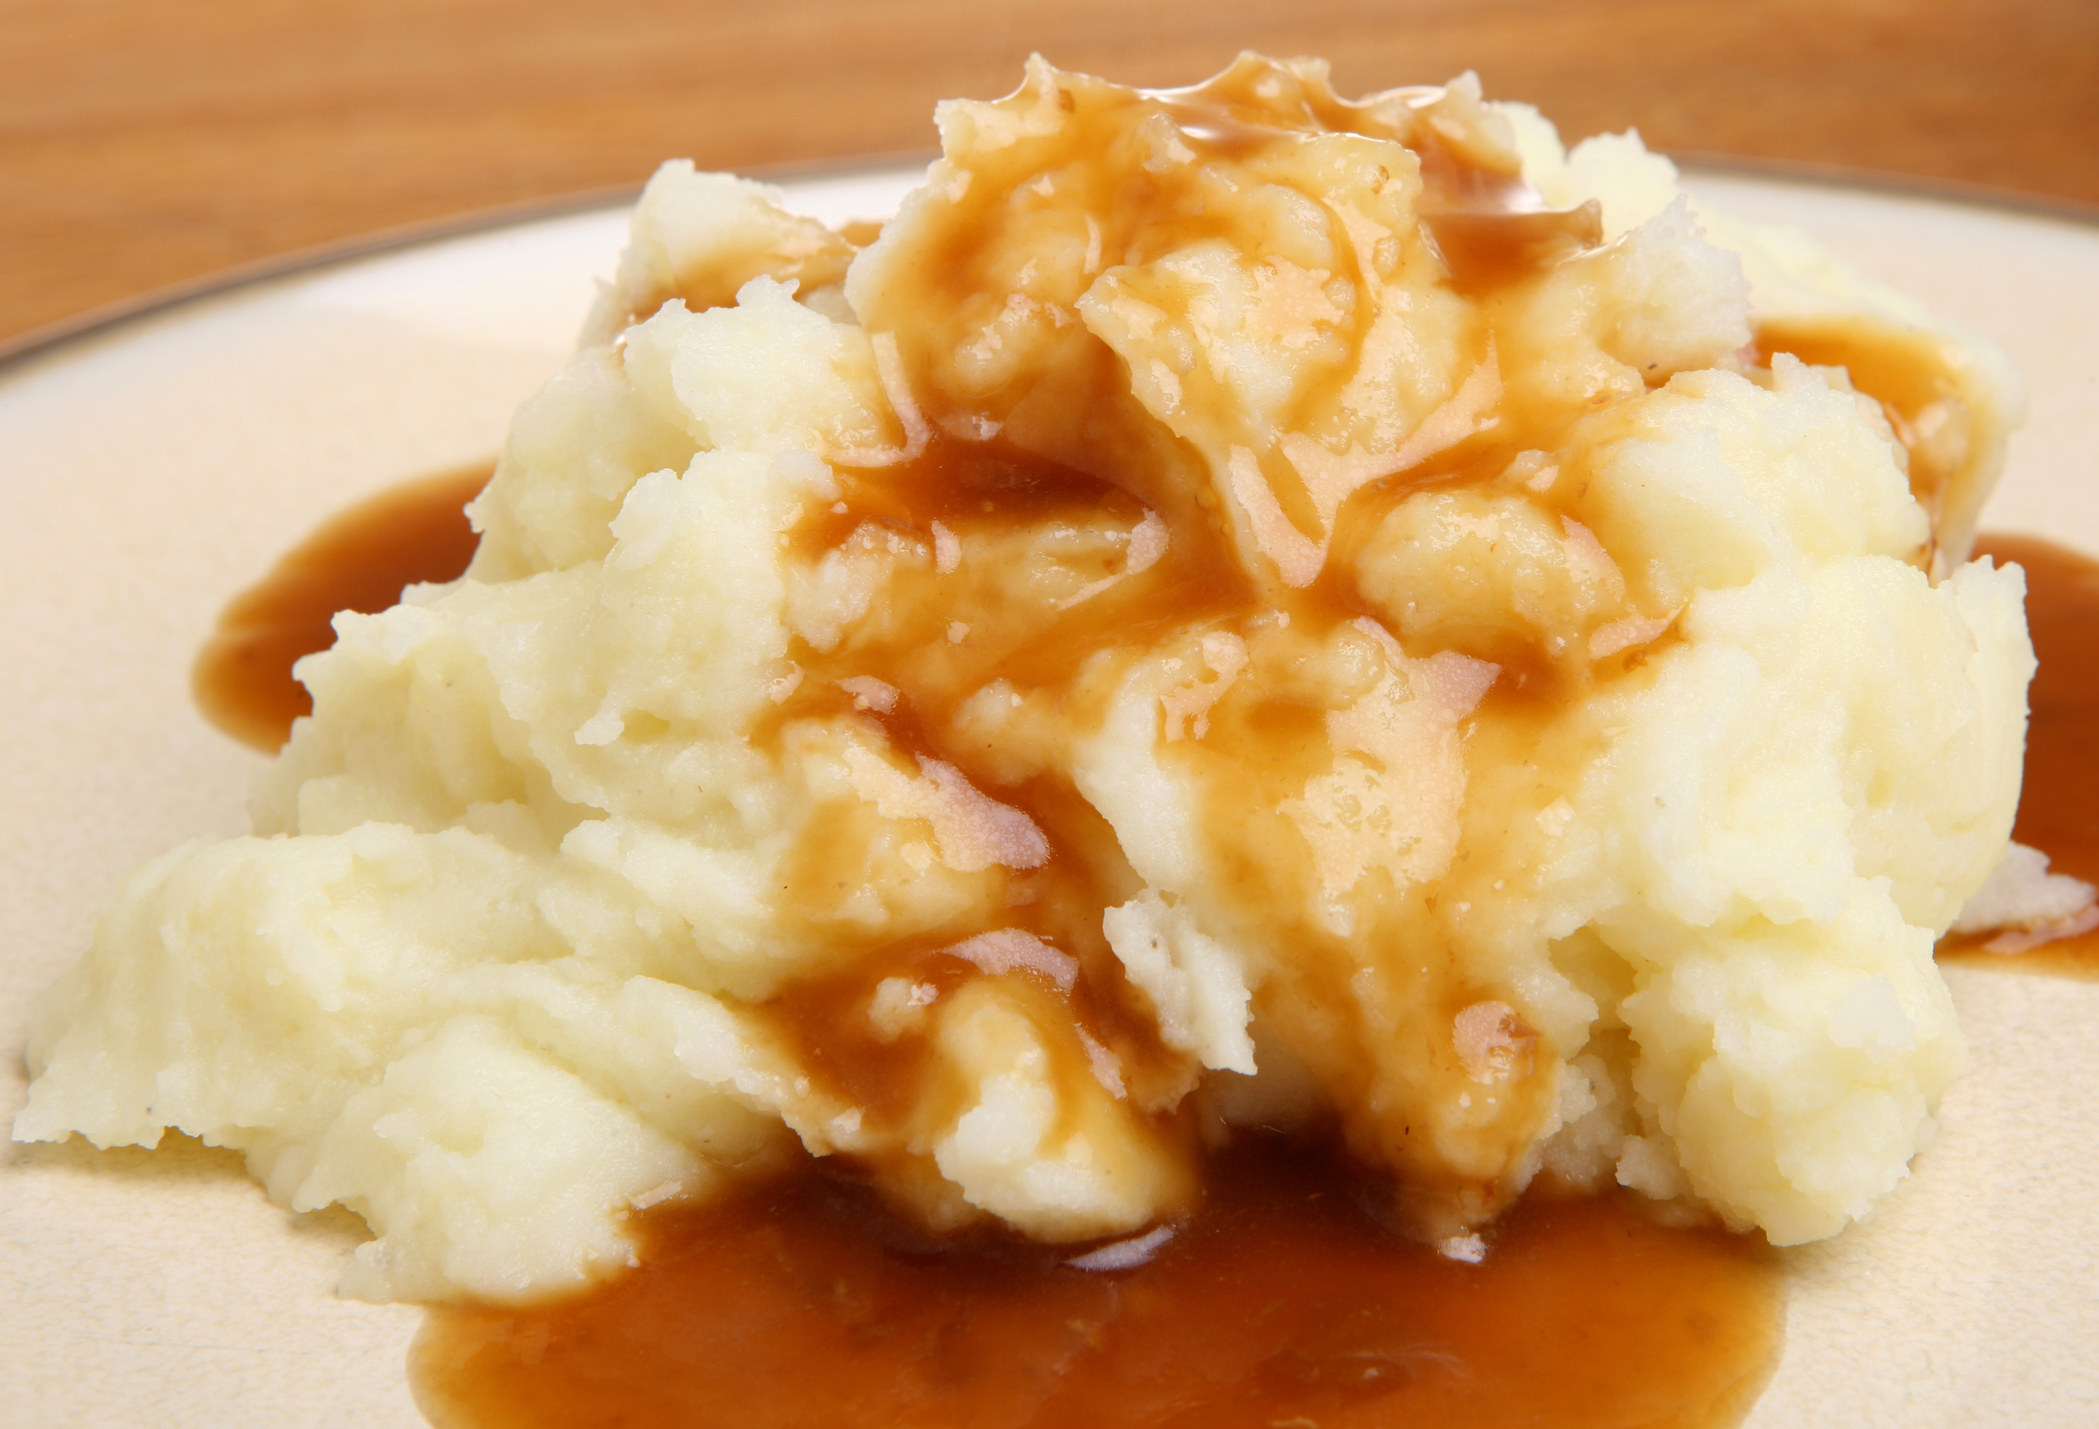 Mashed potatoes with gravy.